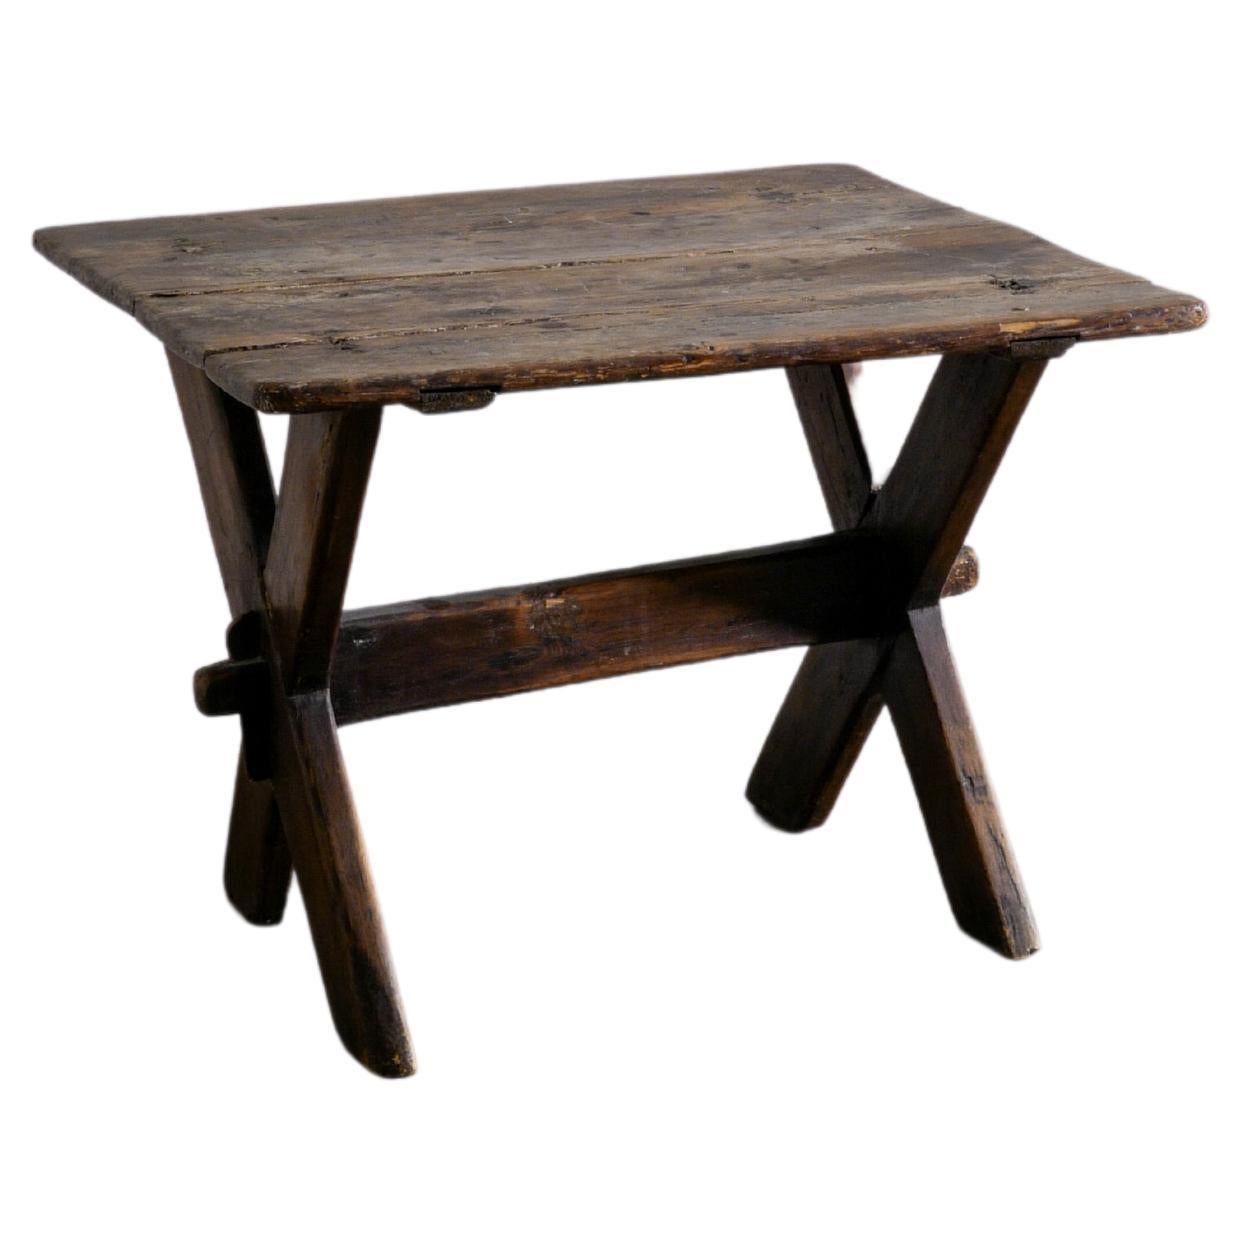 Swedish Primitive Side Coffee Table in Stained Pine Produced in the Late 1800s